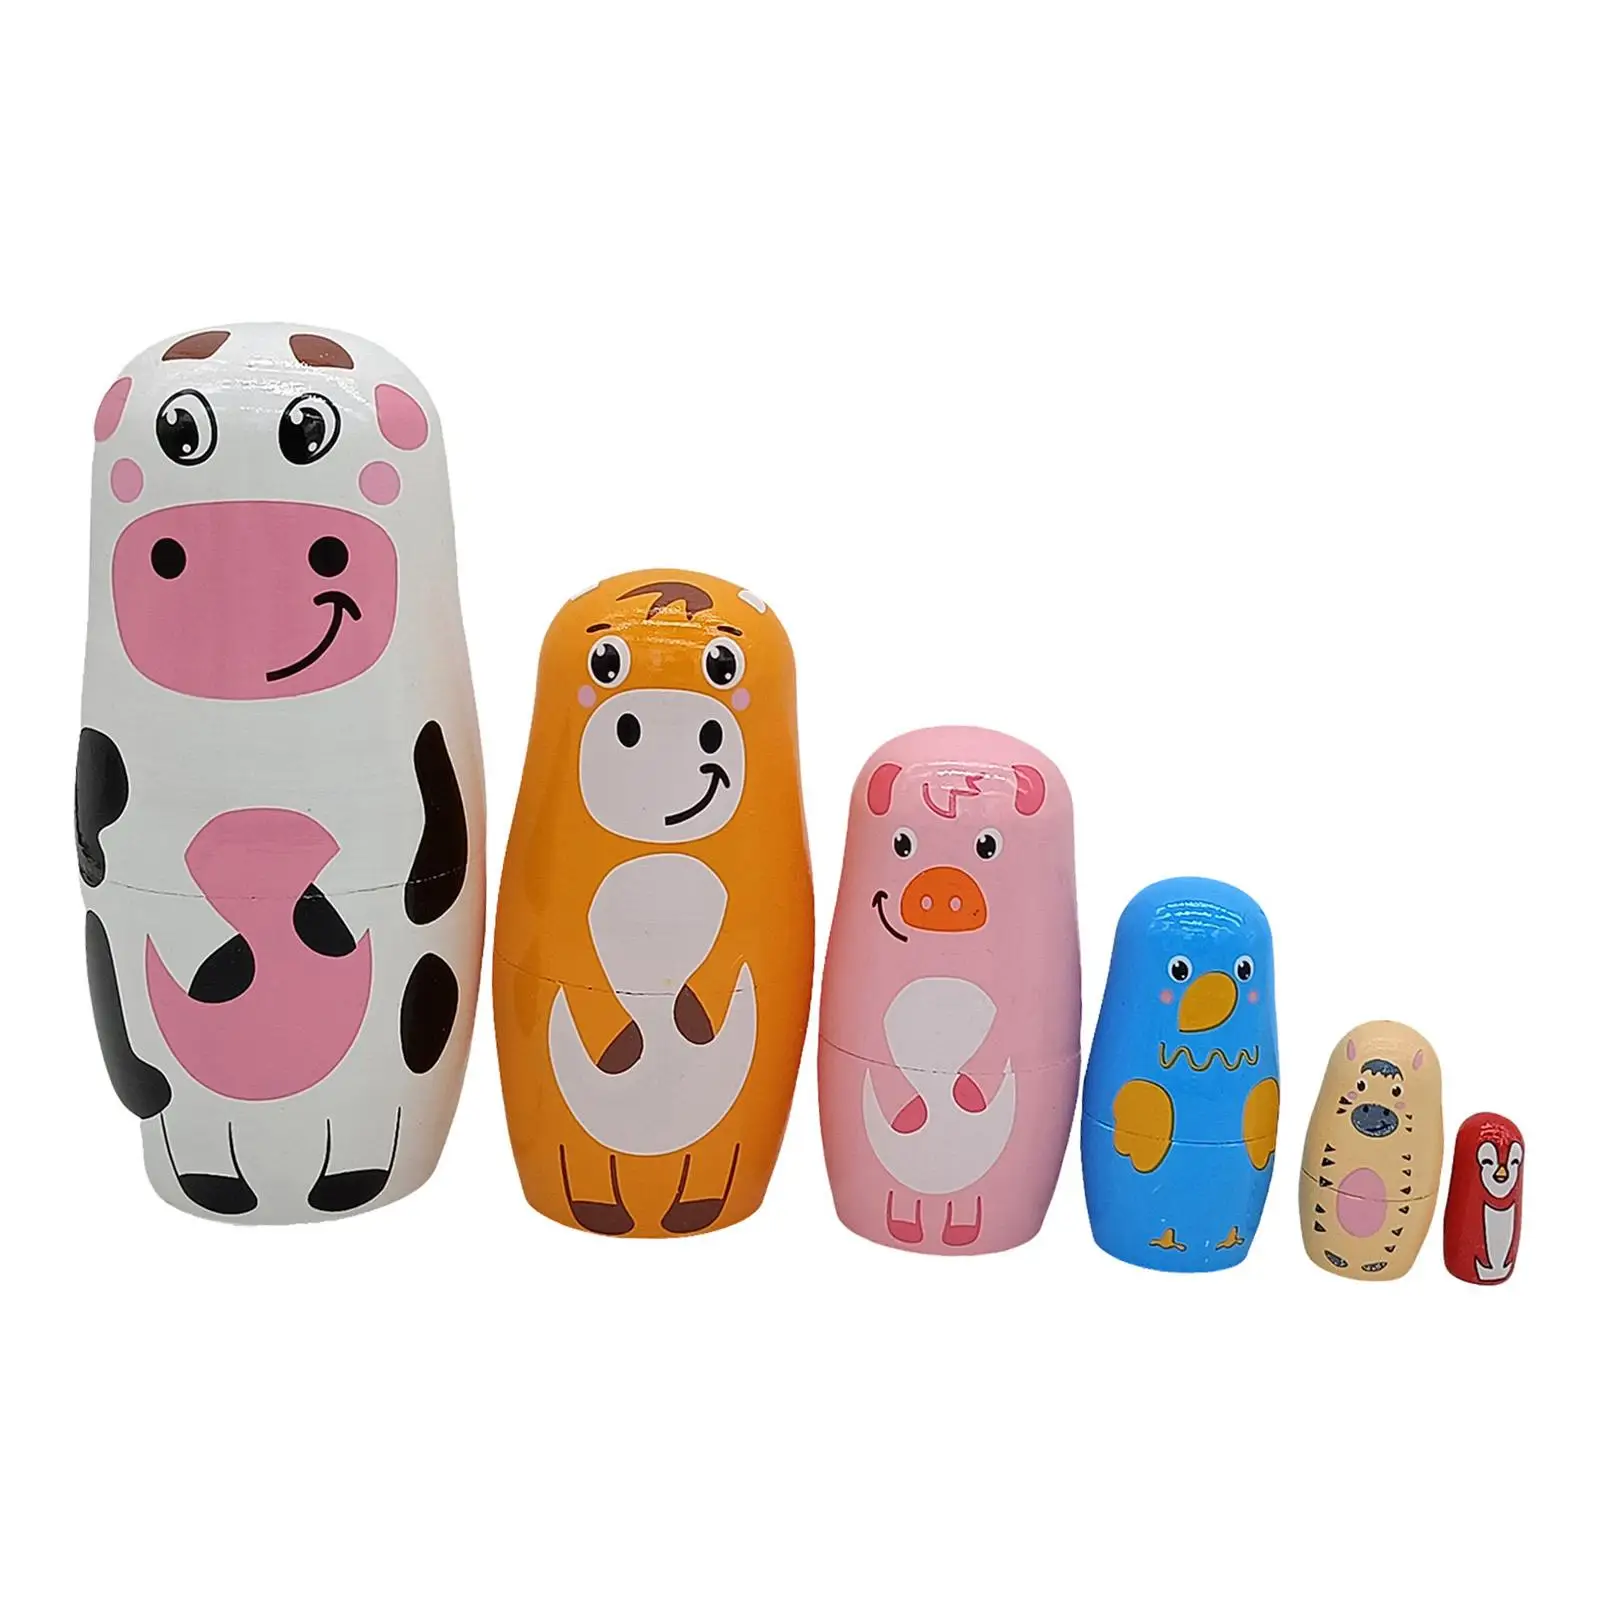 

6x Wooden Russian Nesting Dolls Traditional Handmade Matryoshka Animal Picture Stacking Toy for Tabletop Ornaments Children Toy